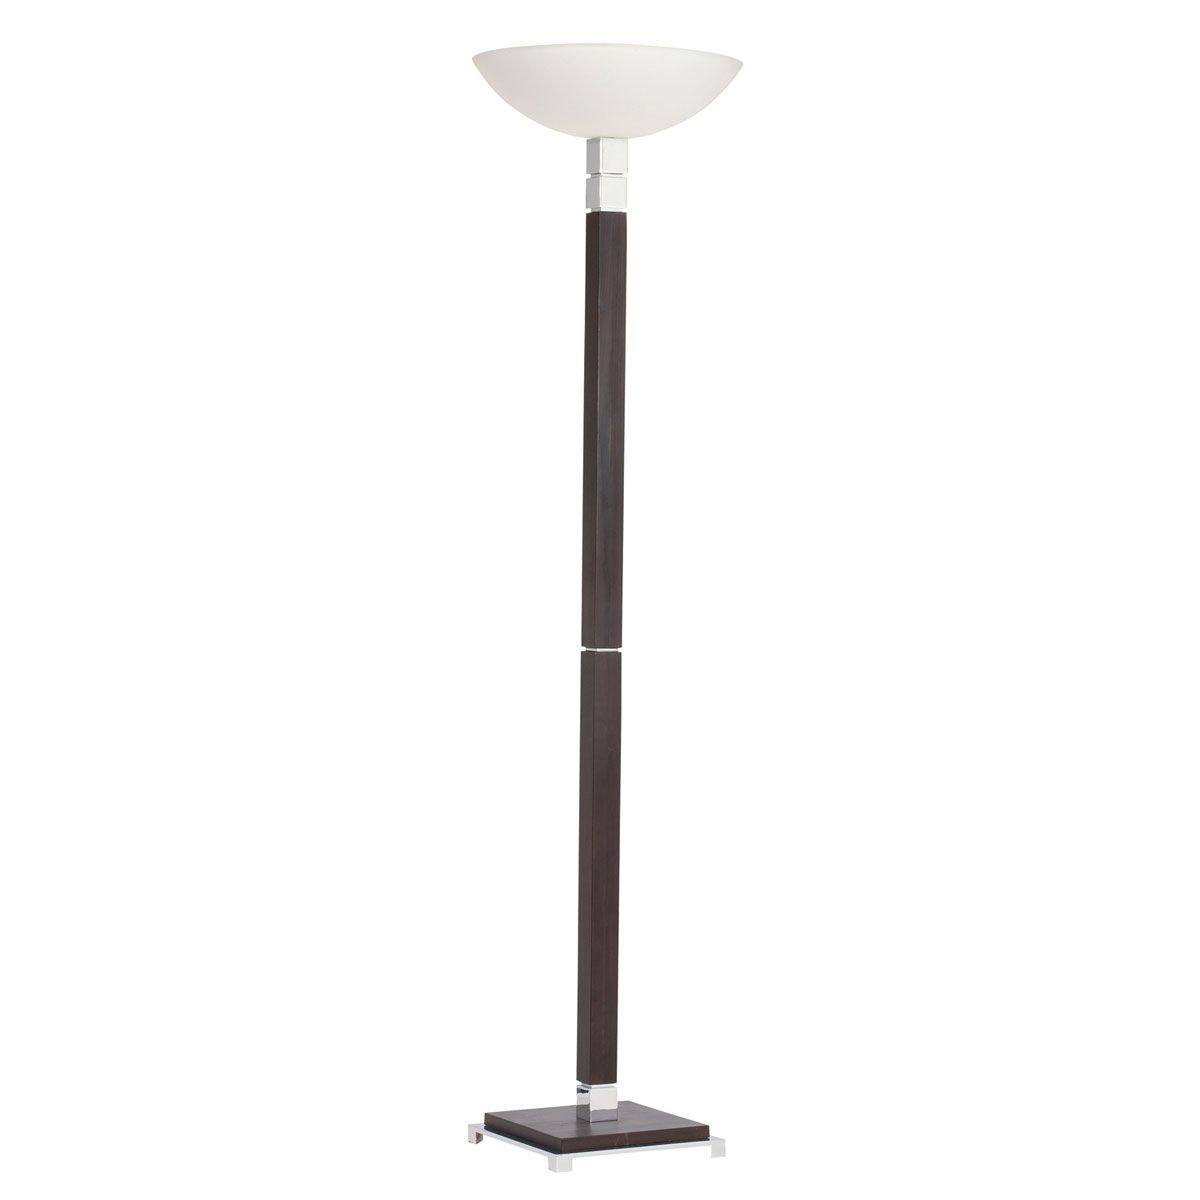 Kichler Westwood Collections Alex 1 Light Torchiere Floor within size 1200 X 1200